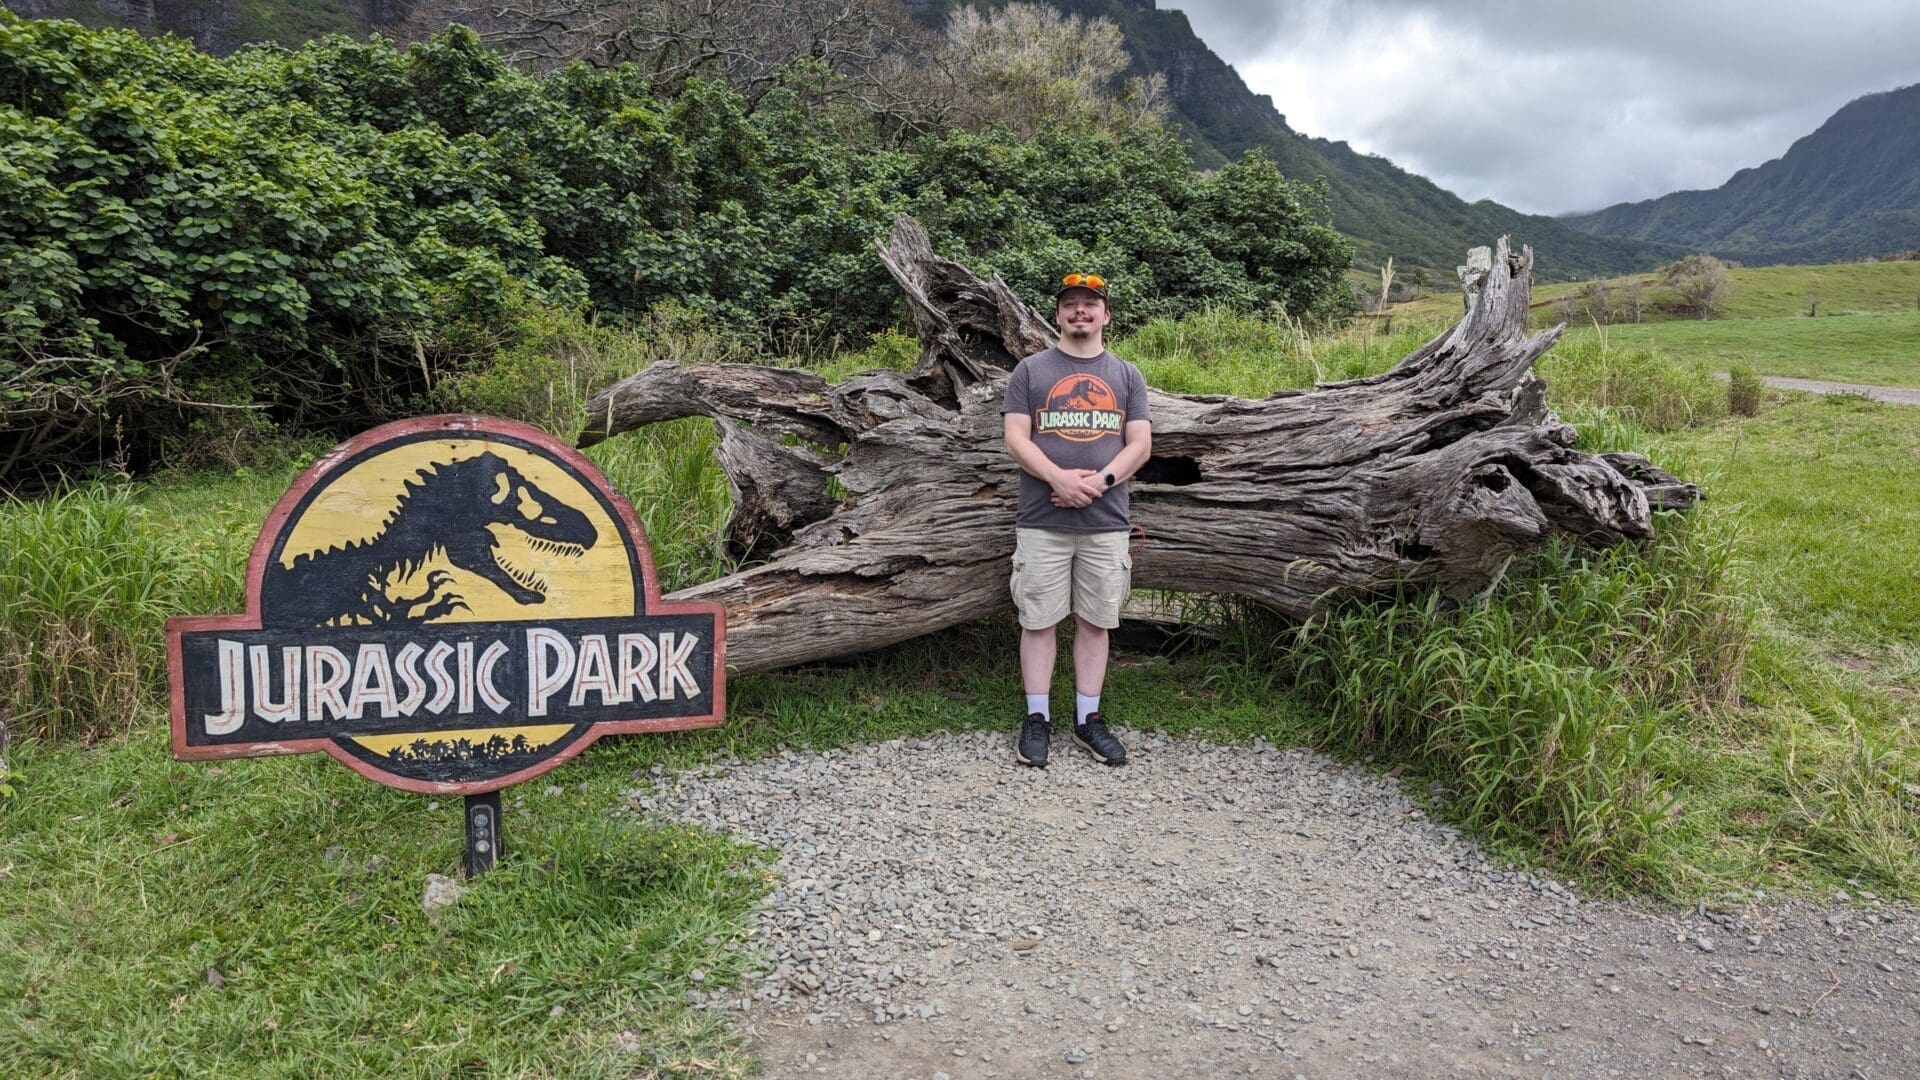 Me in front of the JURASSIC PARK LOG!